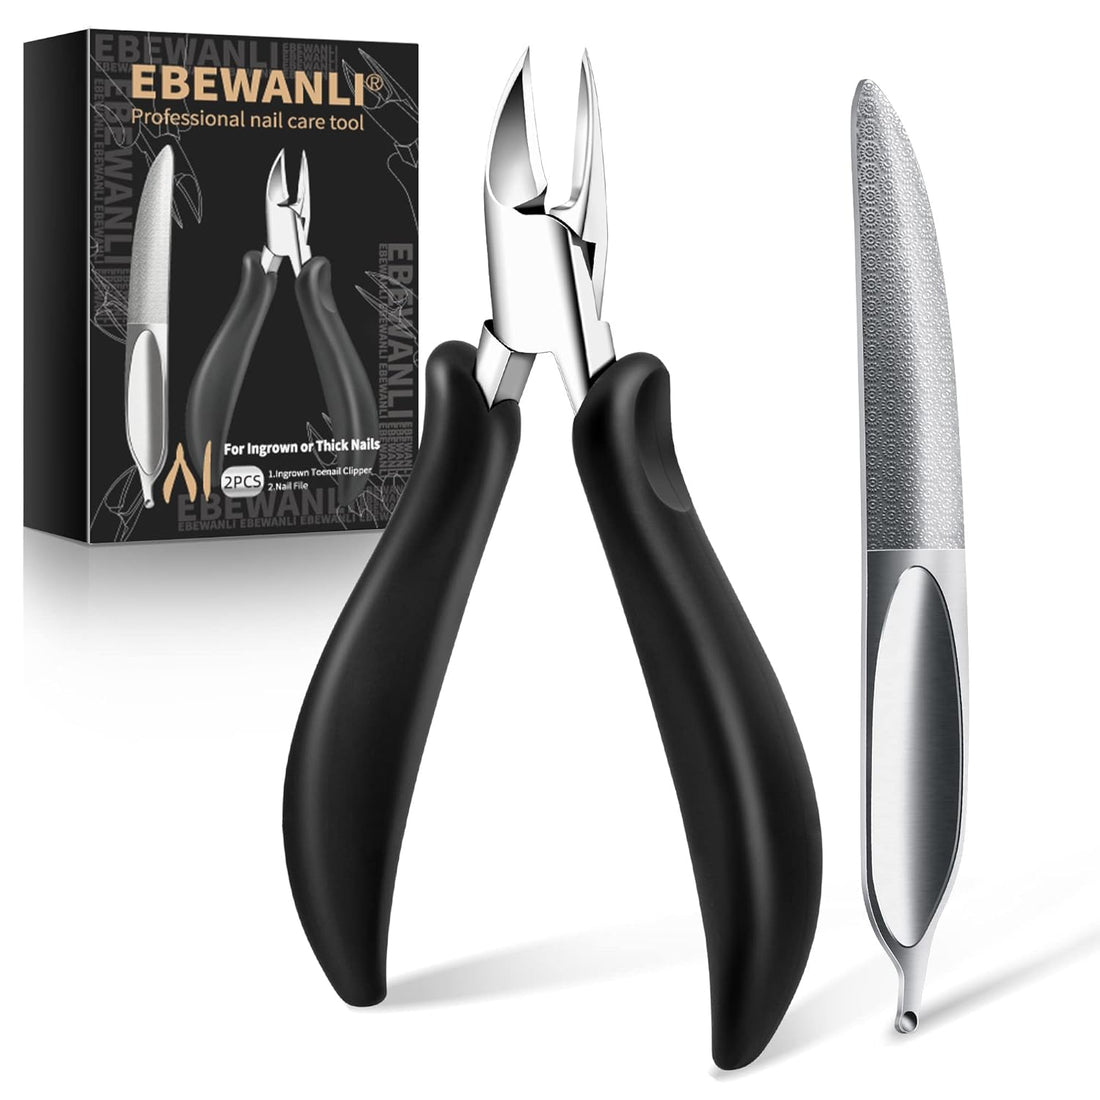 EBEWANLI Ingrown Toenail Clippers, Medical Grade Toenail Clippers for Thick Nails, Stainless Steel Heavy Duty Toenail Clippers for Seniors, Men, Women, Adult Podiatrist Professional Pedicure Tool